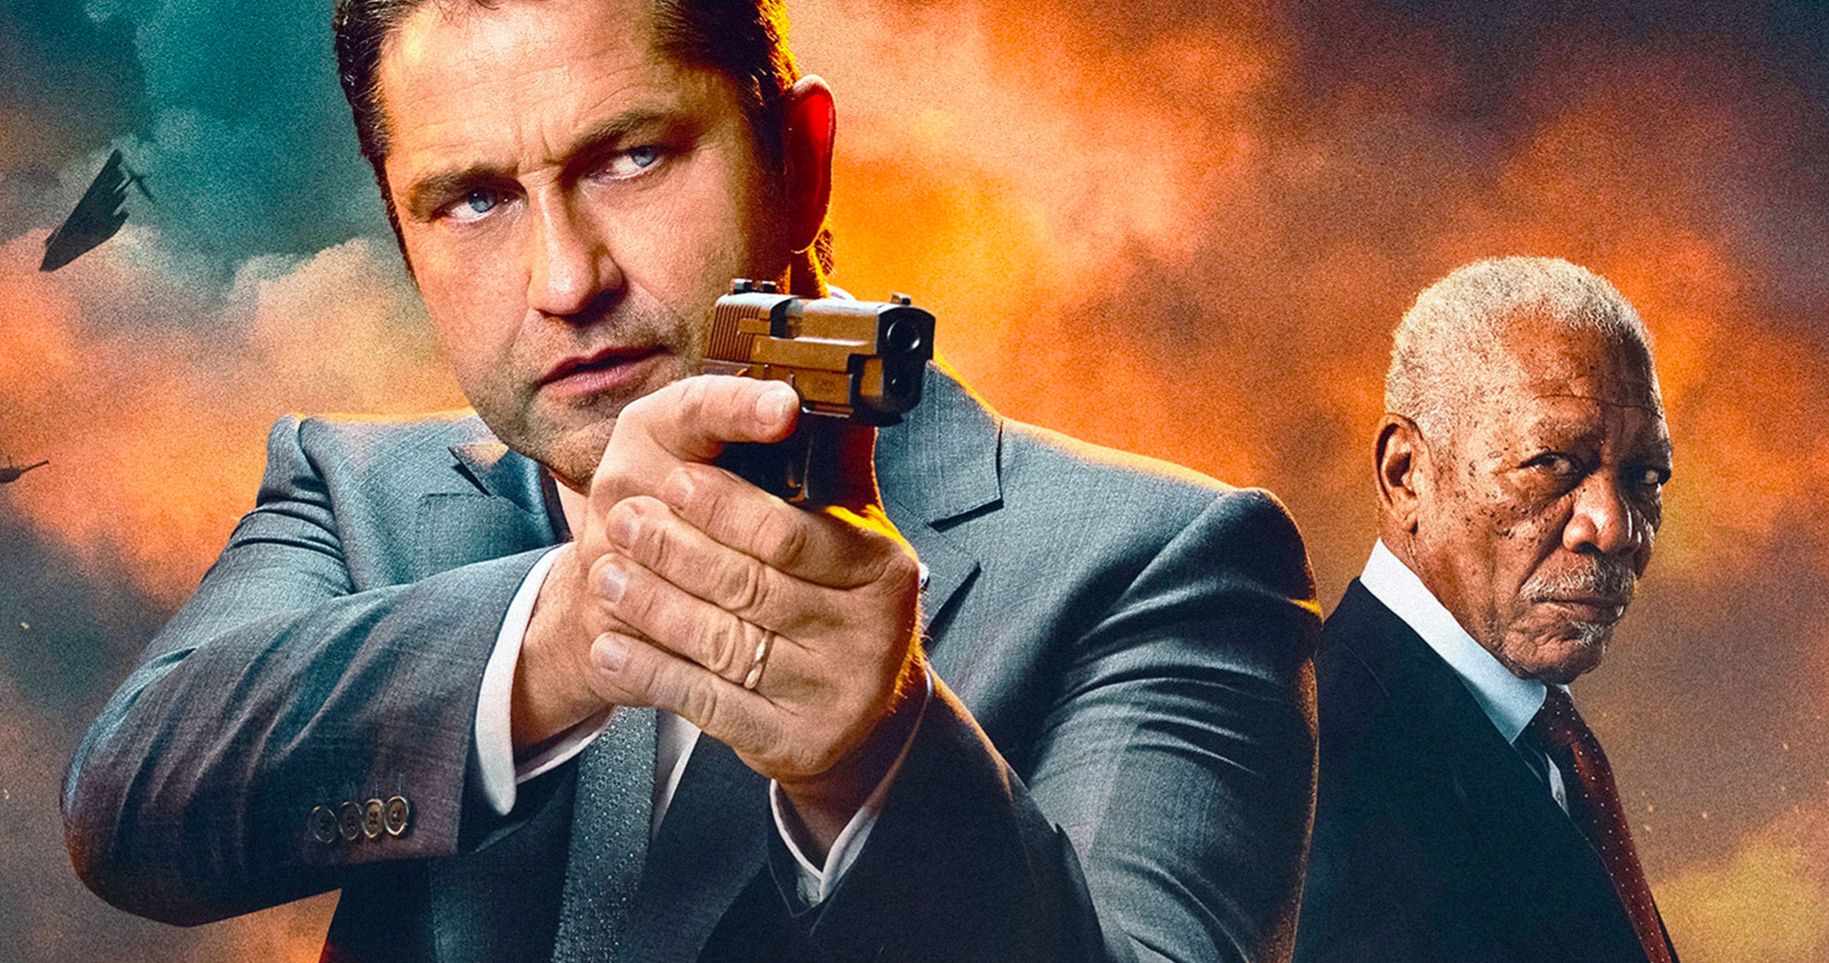 Angel Has Fallen Featurette Goes Behind the Action for the Digital Release [Exclusive]